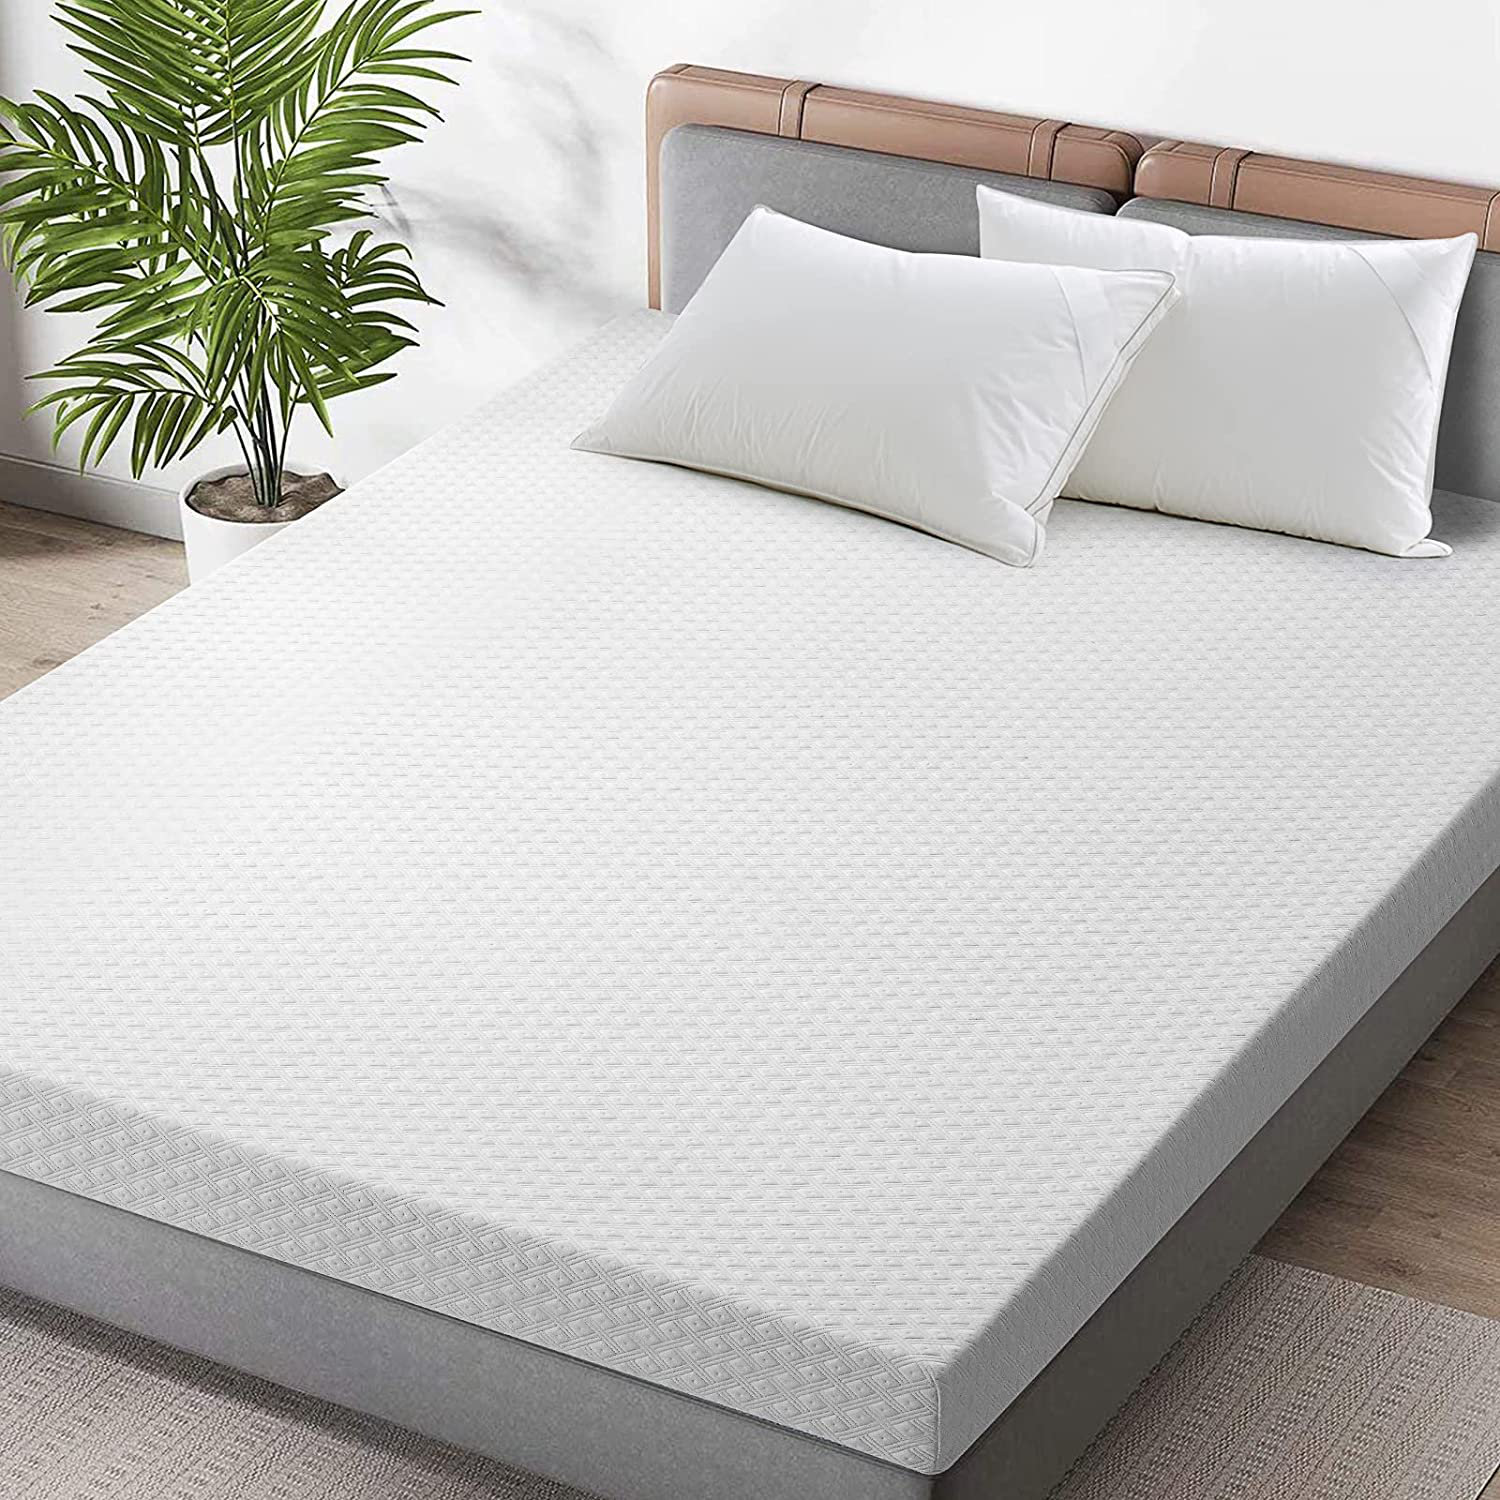 8 inch Mattress, Dual Layer Memory Foam Mattress Topper with Adjustable  Elastic Straps 